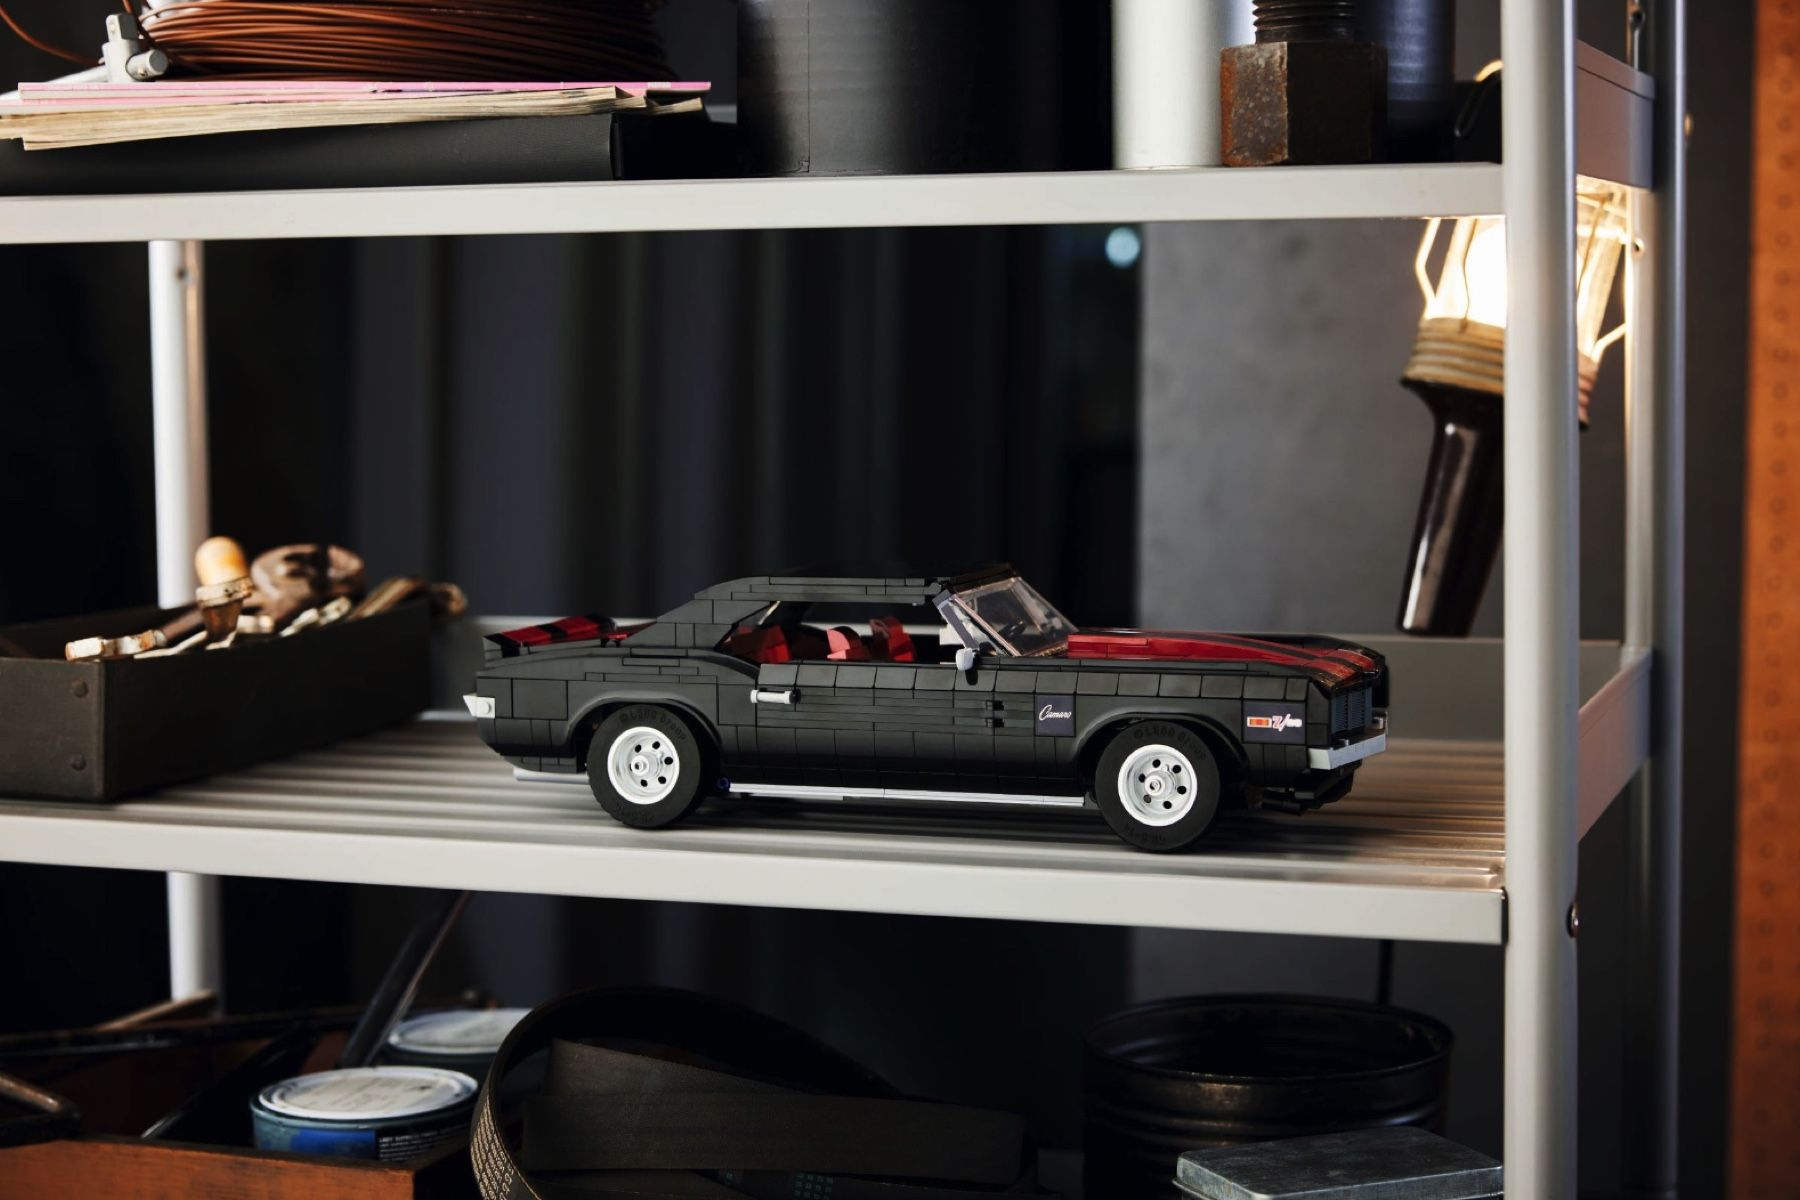 Turn a Lego Ford Mustang Into a Vintage Mopar or Chevy Truck With